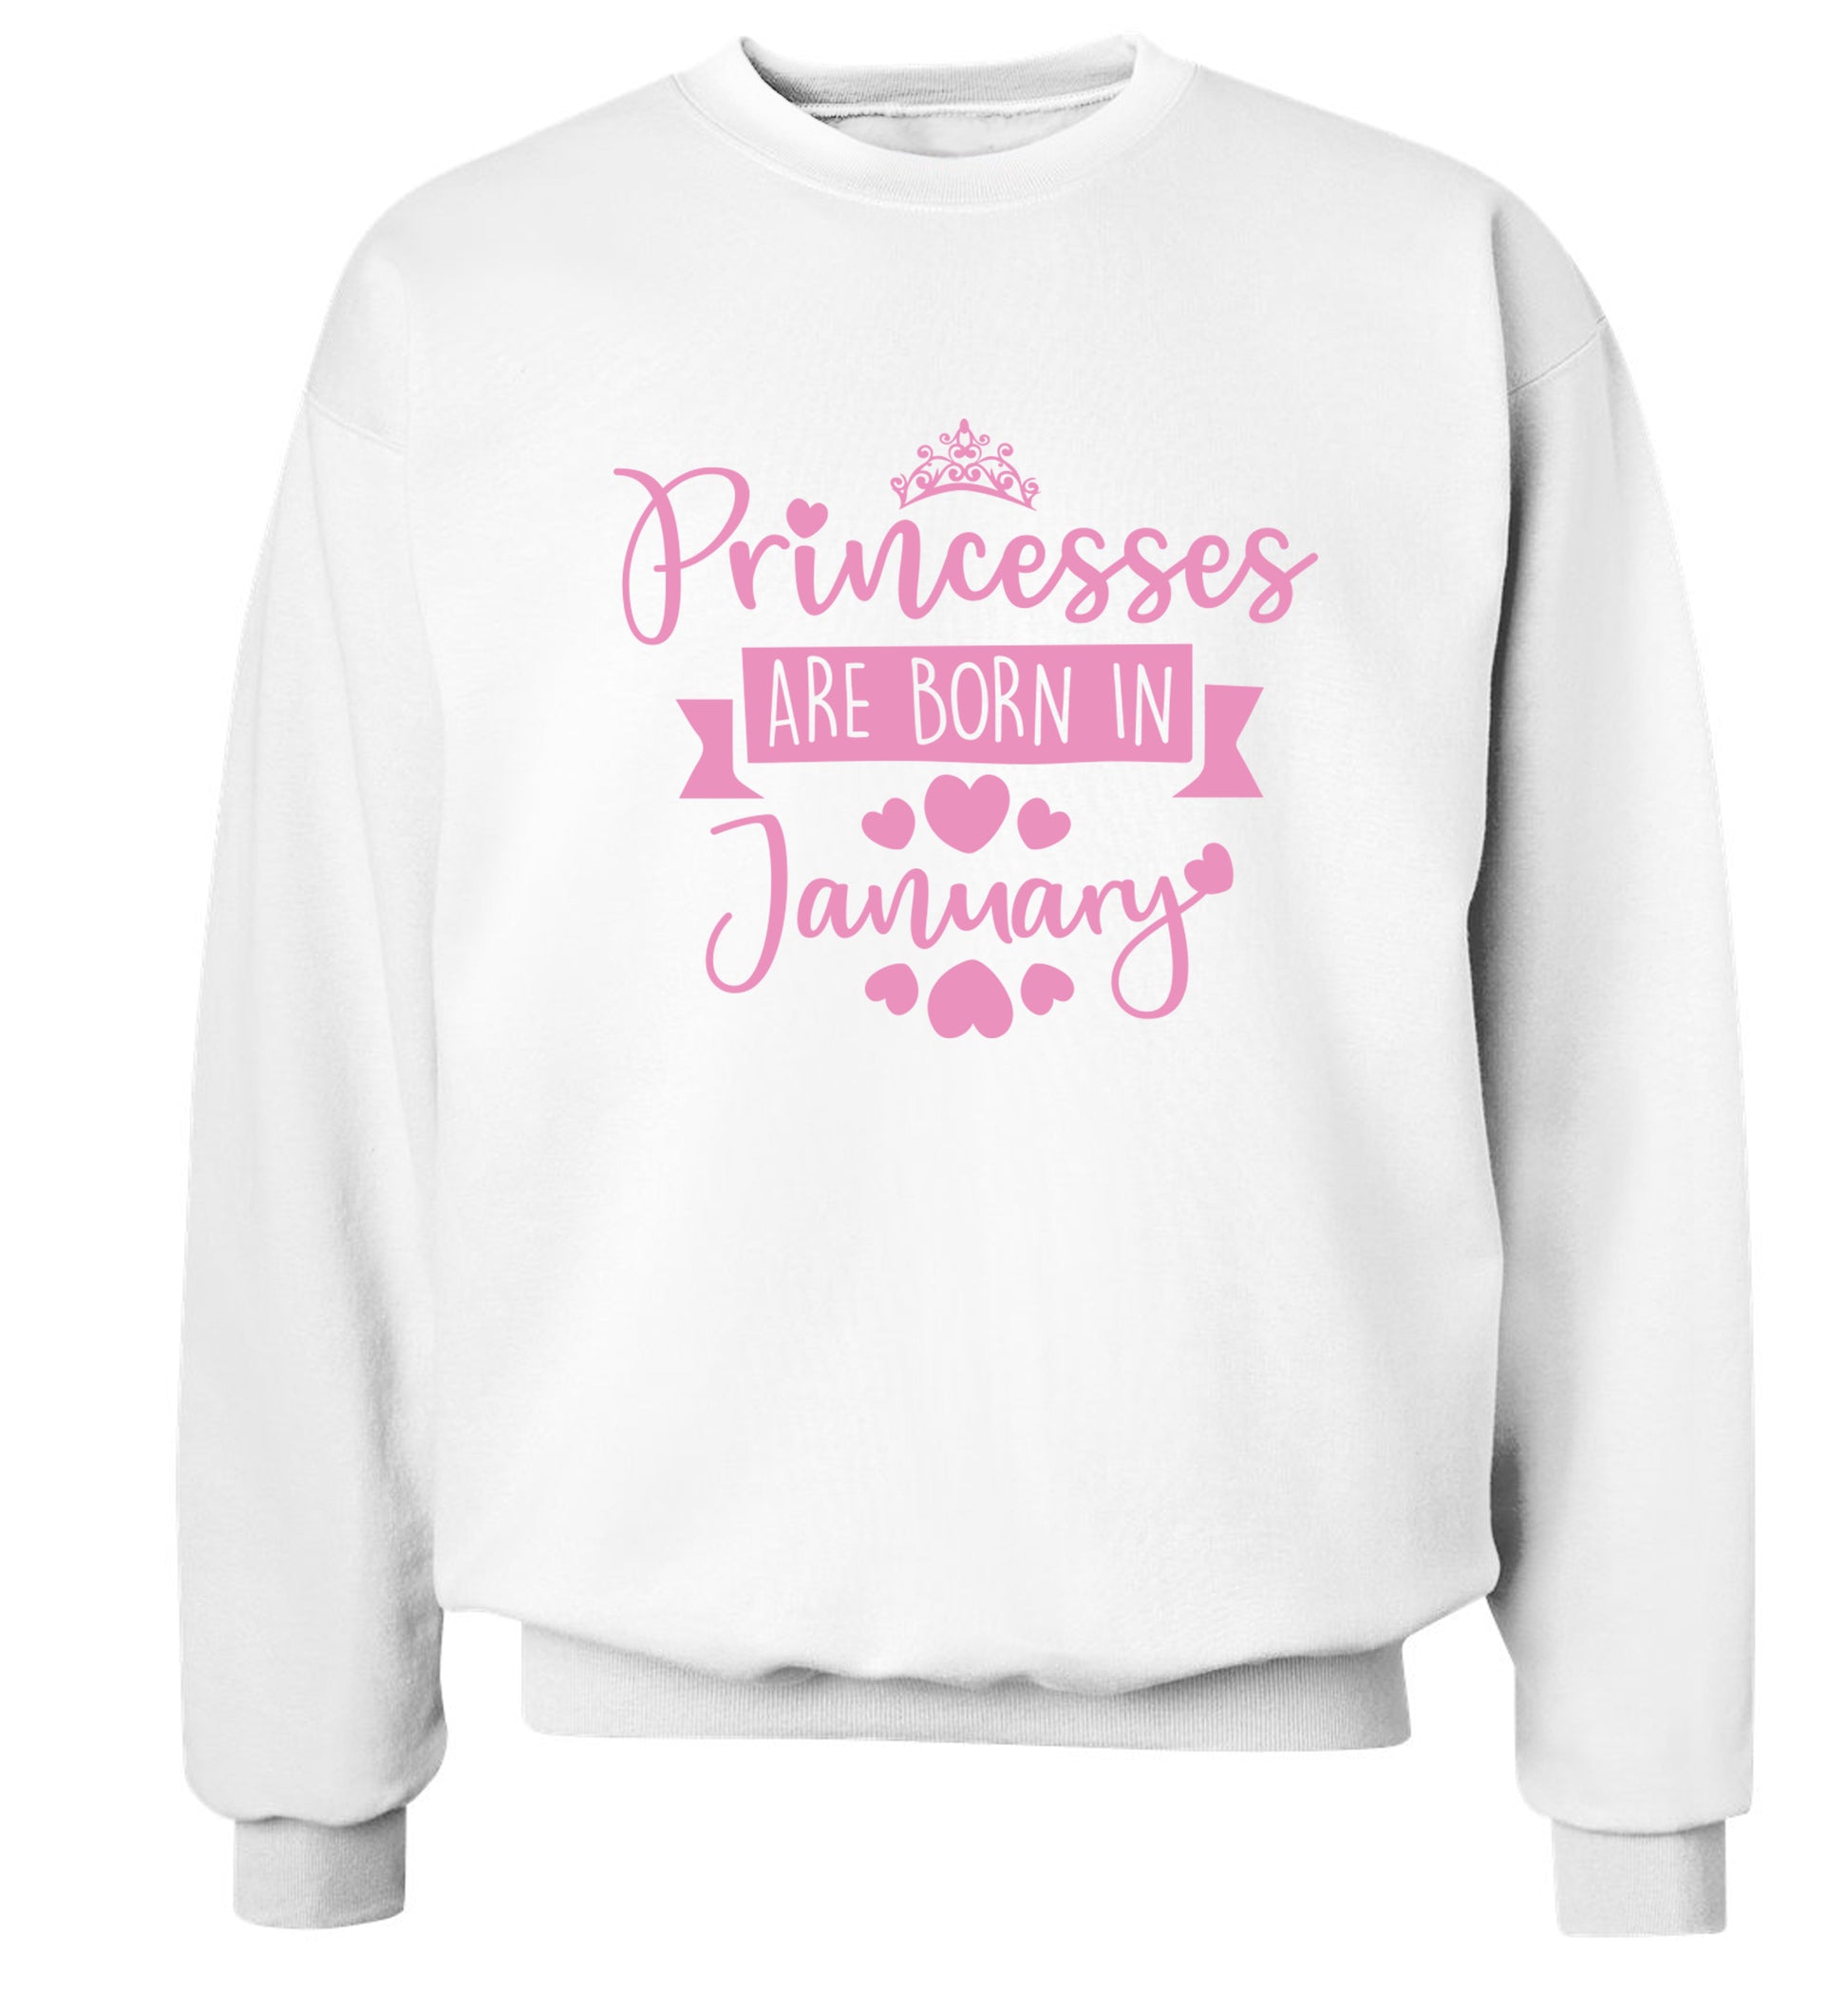 Princesses are born in November Adult's unisex white Sweater 2XL